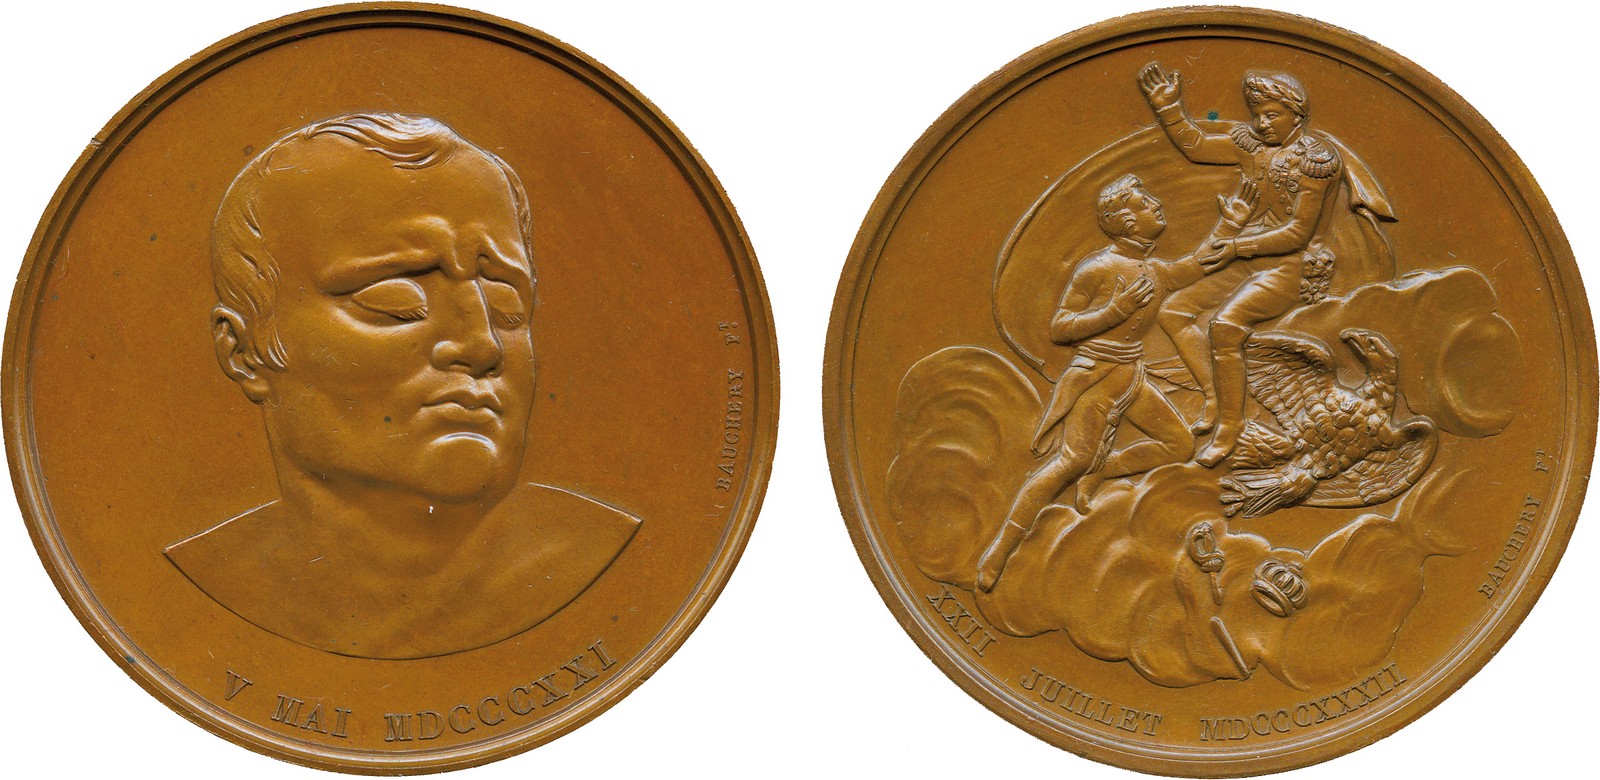 COMMEMORATIVE MEDALS, WORLD MEDALS, France, The Death of the Duke of Reichstadt (Napoleon II),